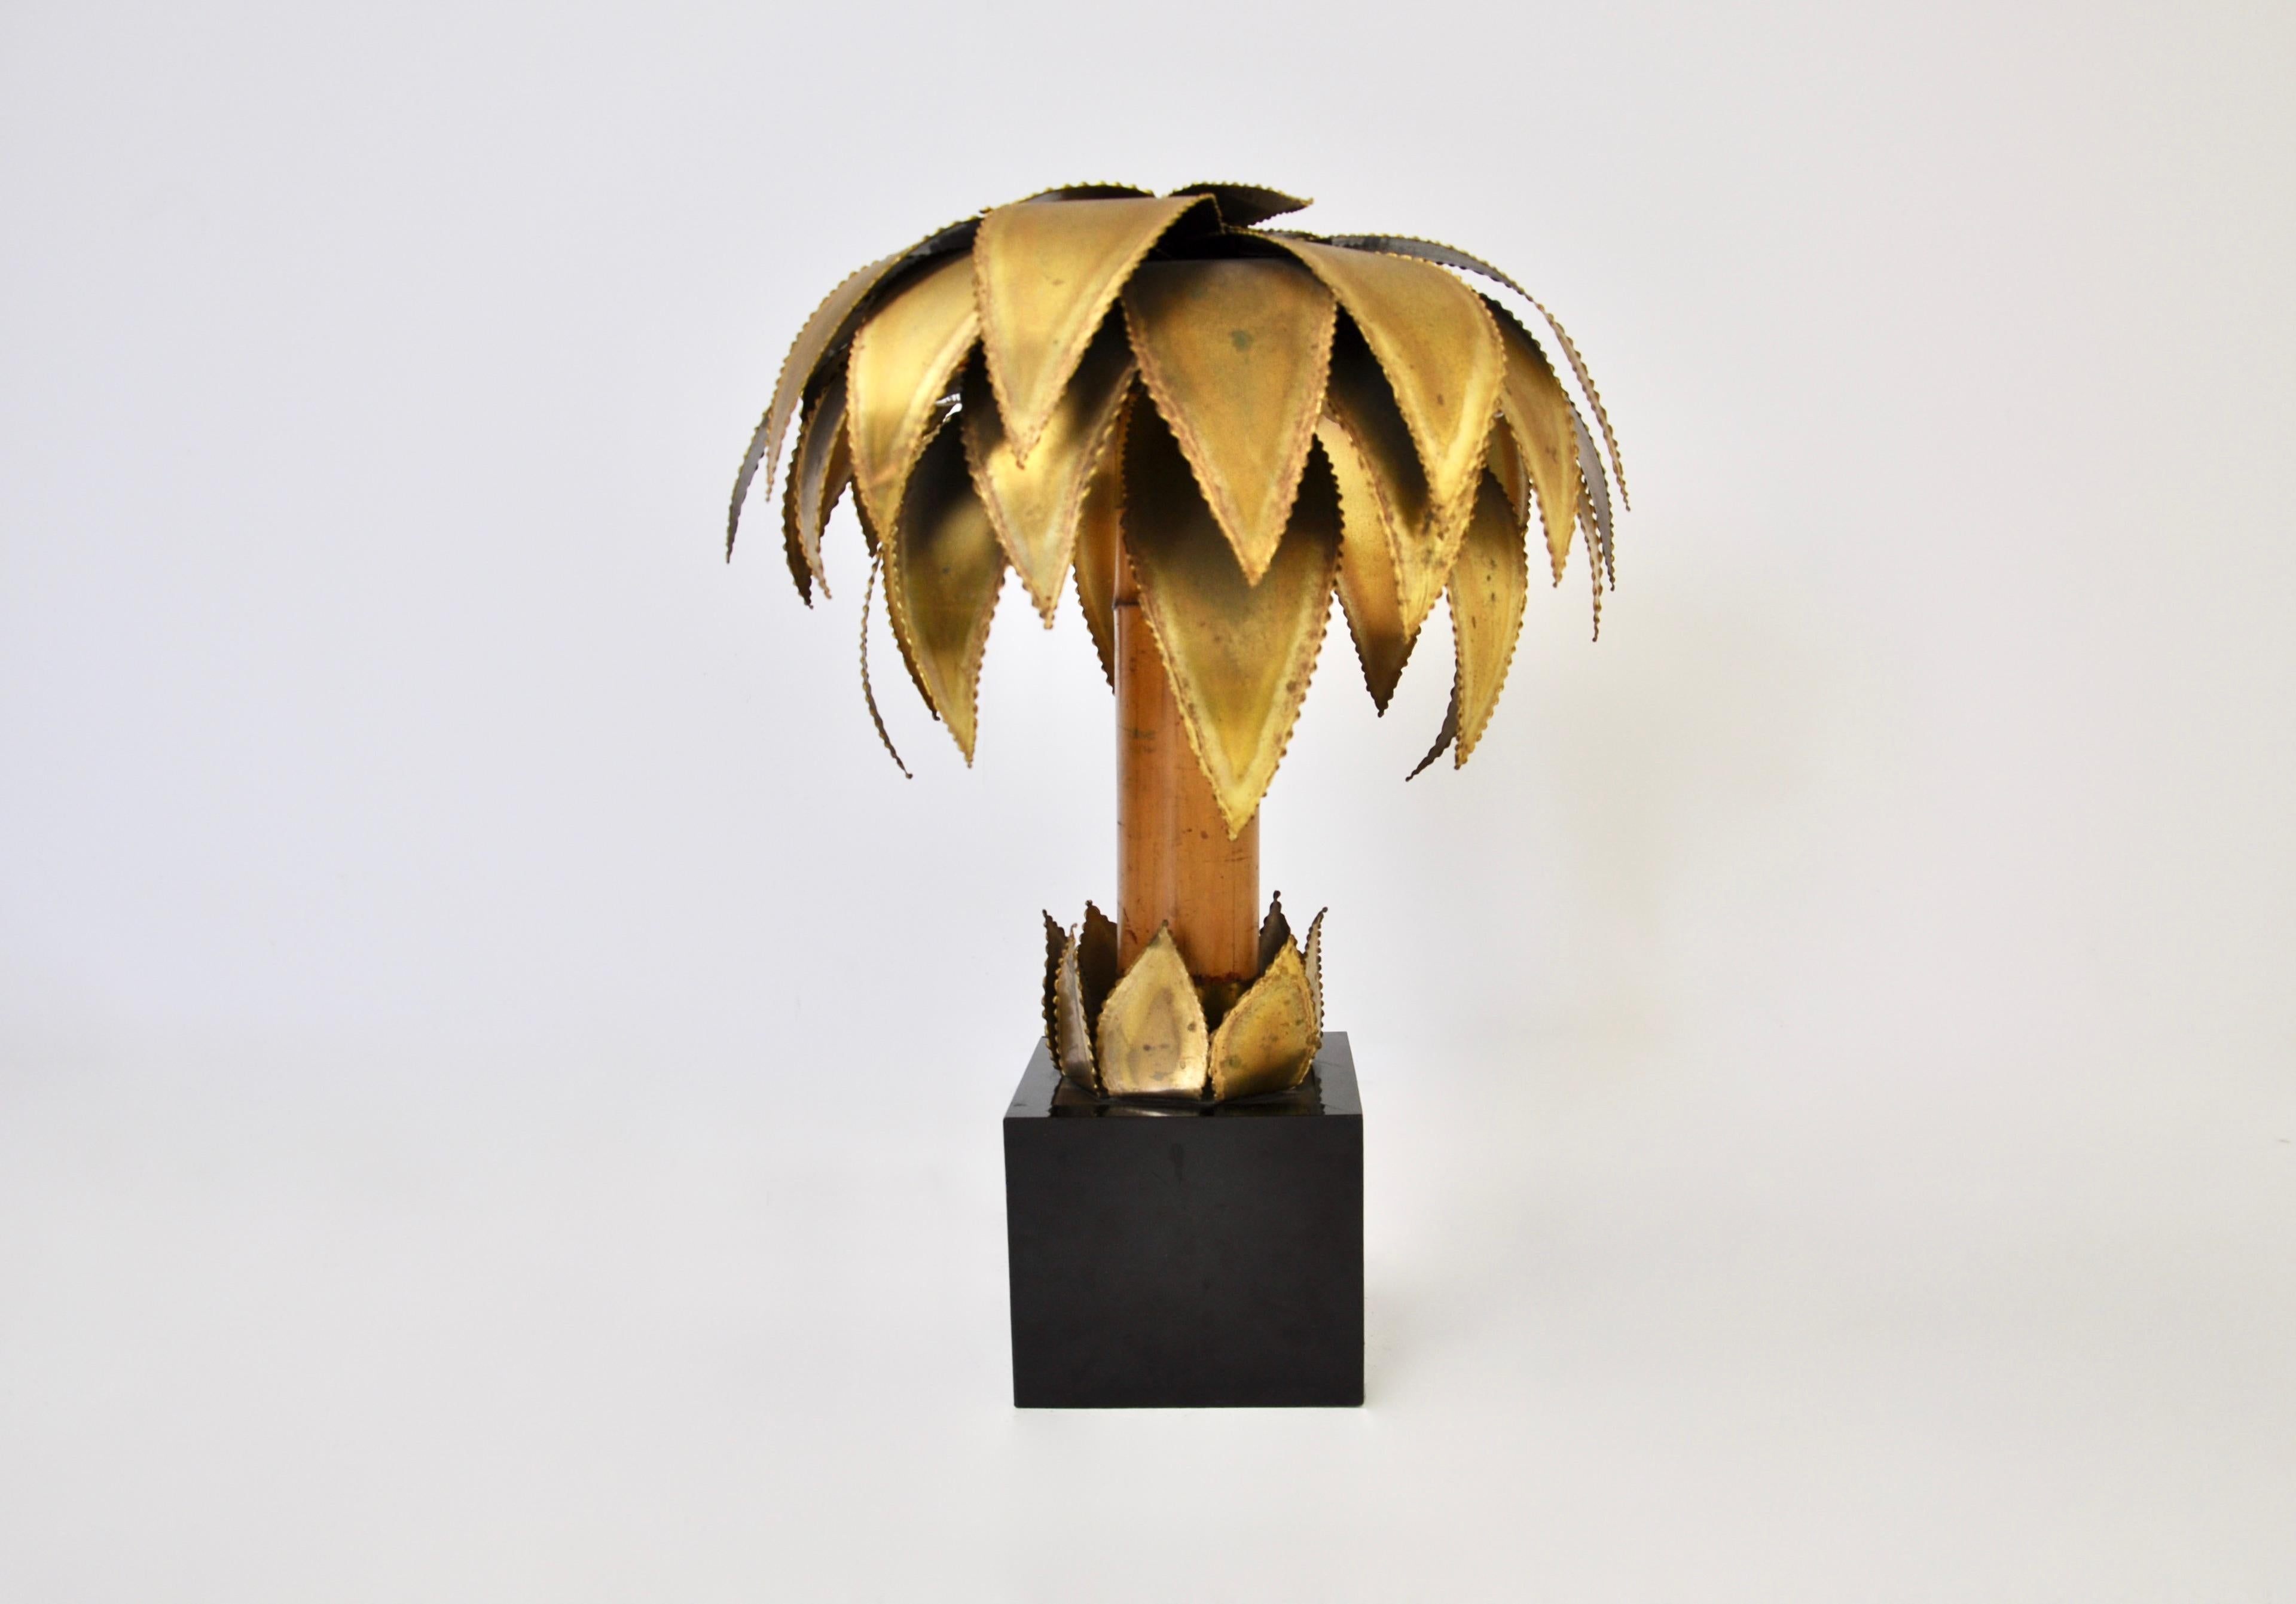 Table lamp in brass in the shape of a palm tree, trunk in Bamboo, the foot is in Bakelite. Wear due to time and age of the lamp post.